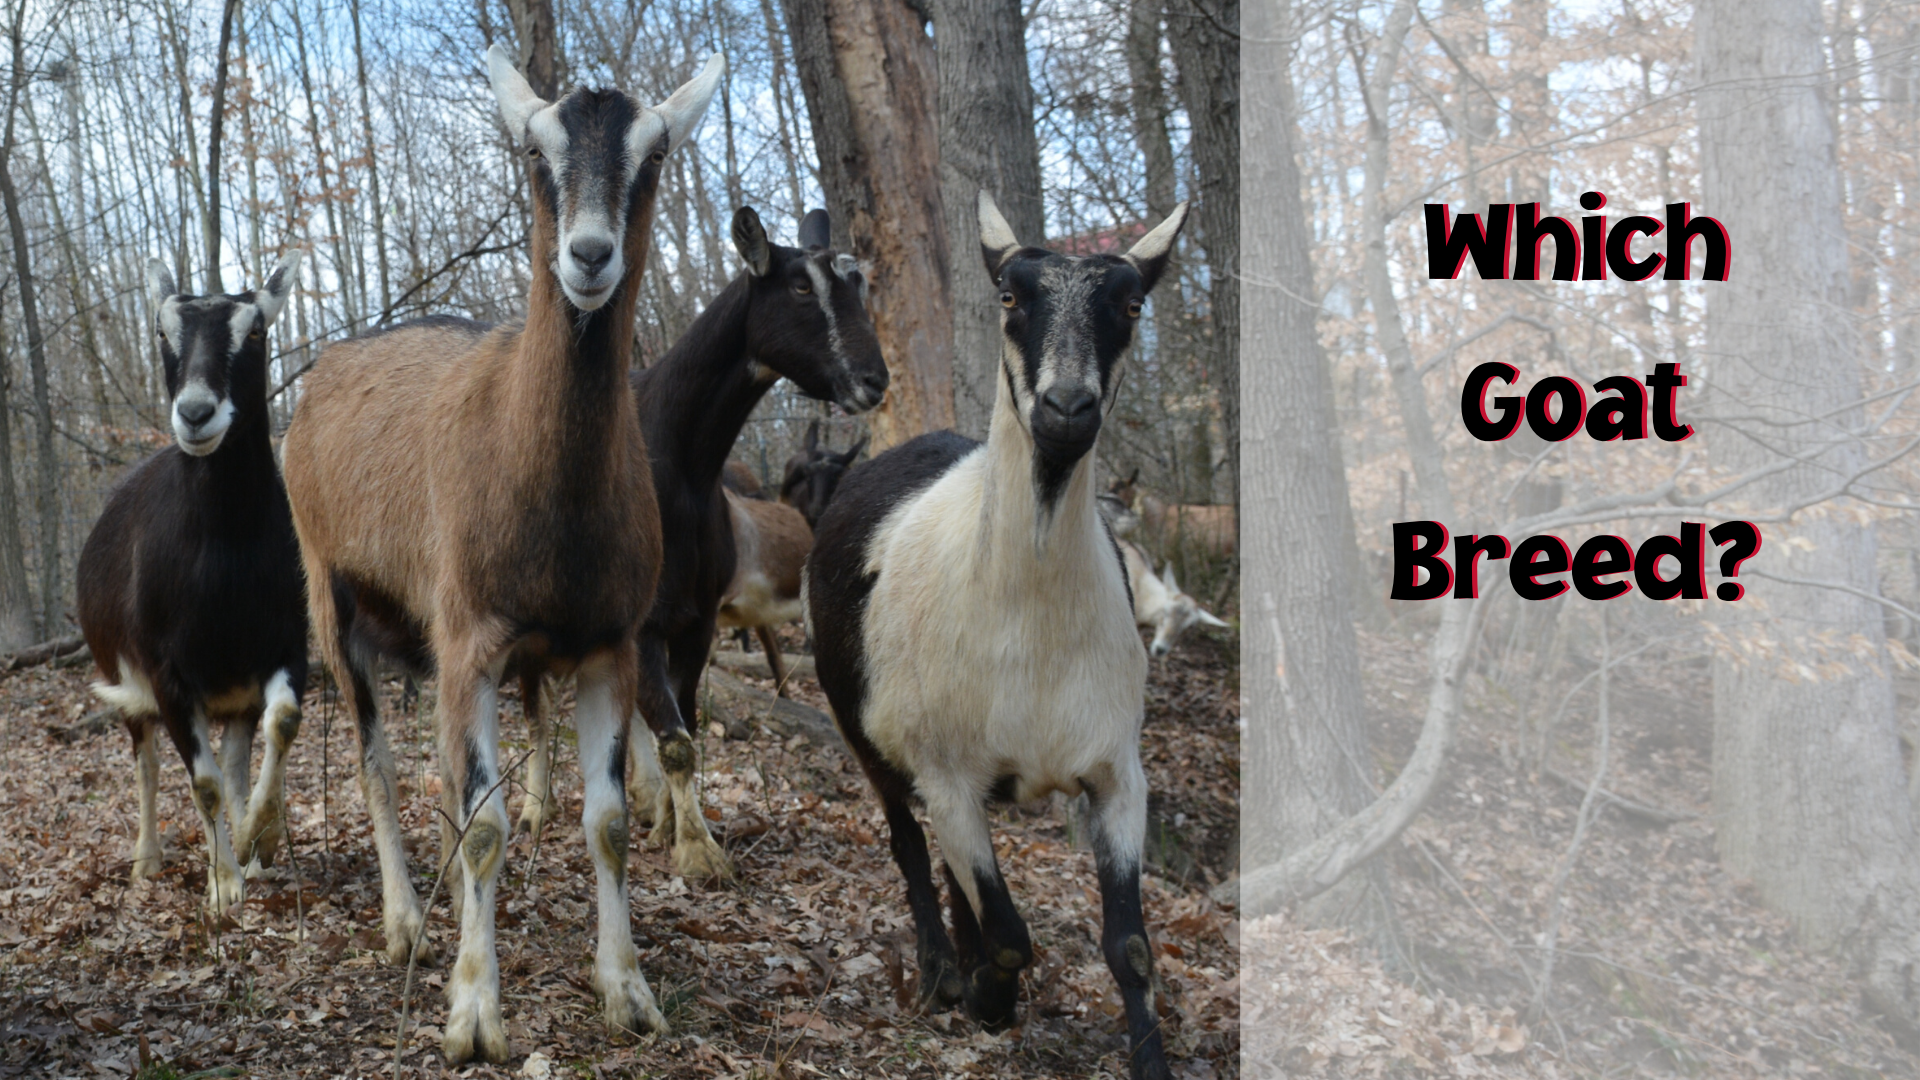 which goat breed?